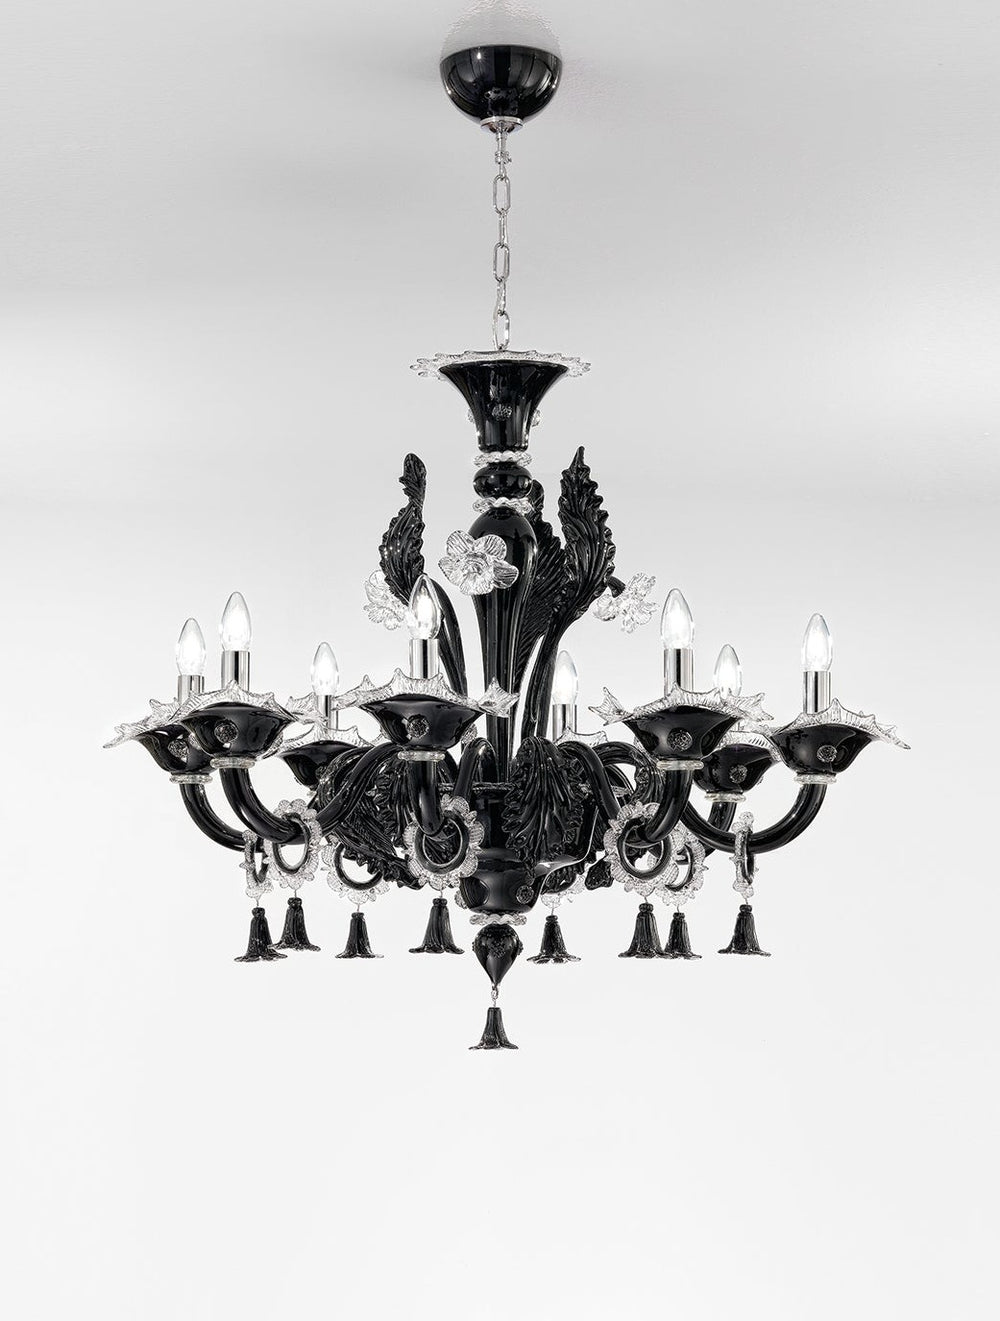 Handmade High Quality Antique Fine Italian Ceiling Pendant Chandelier With Eight Shades And Murano Glass